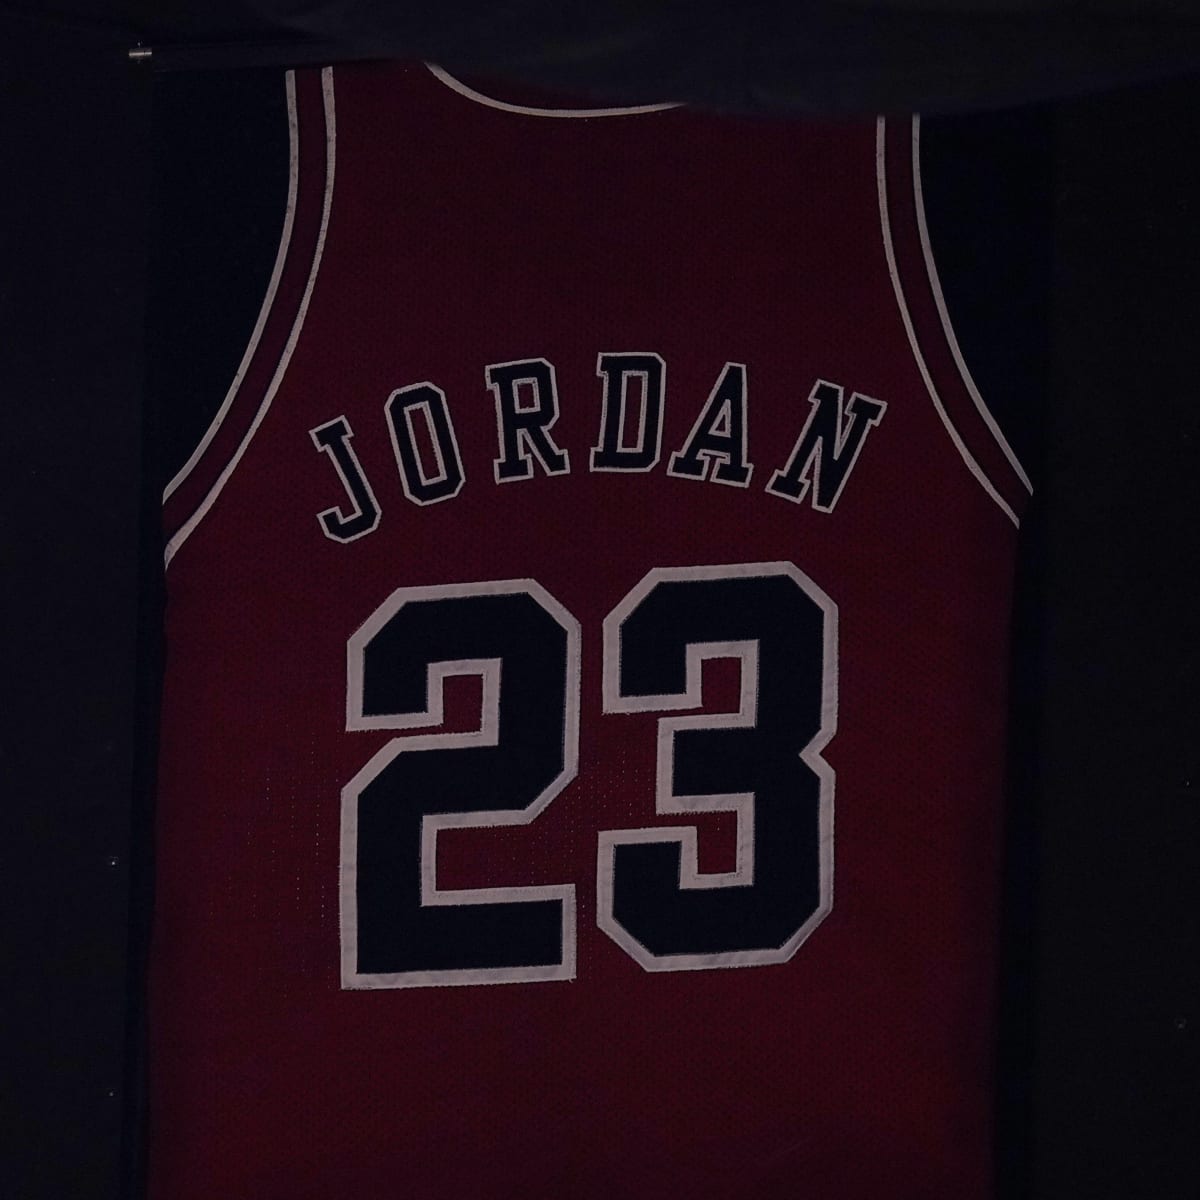 Why the retired Michael Jordan's jersey - Sports Illustrated Chicago Bulls Analysis and More